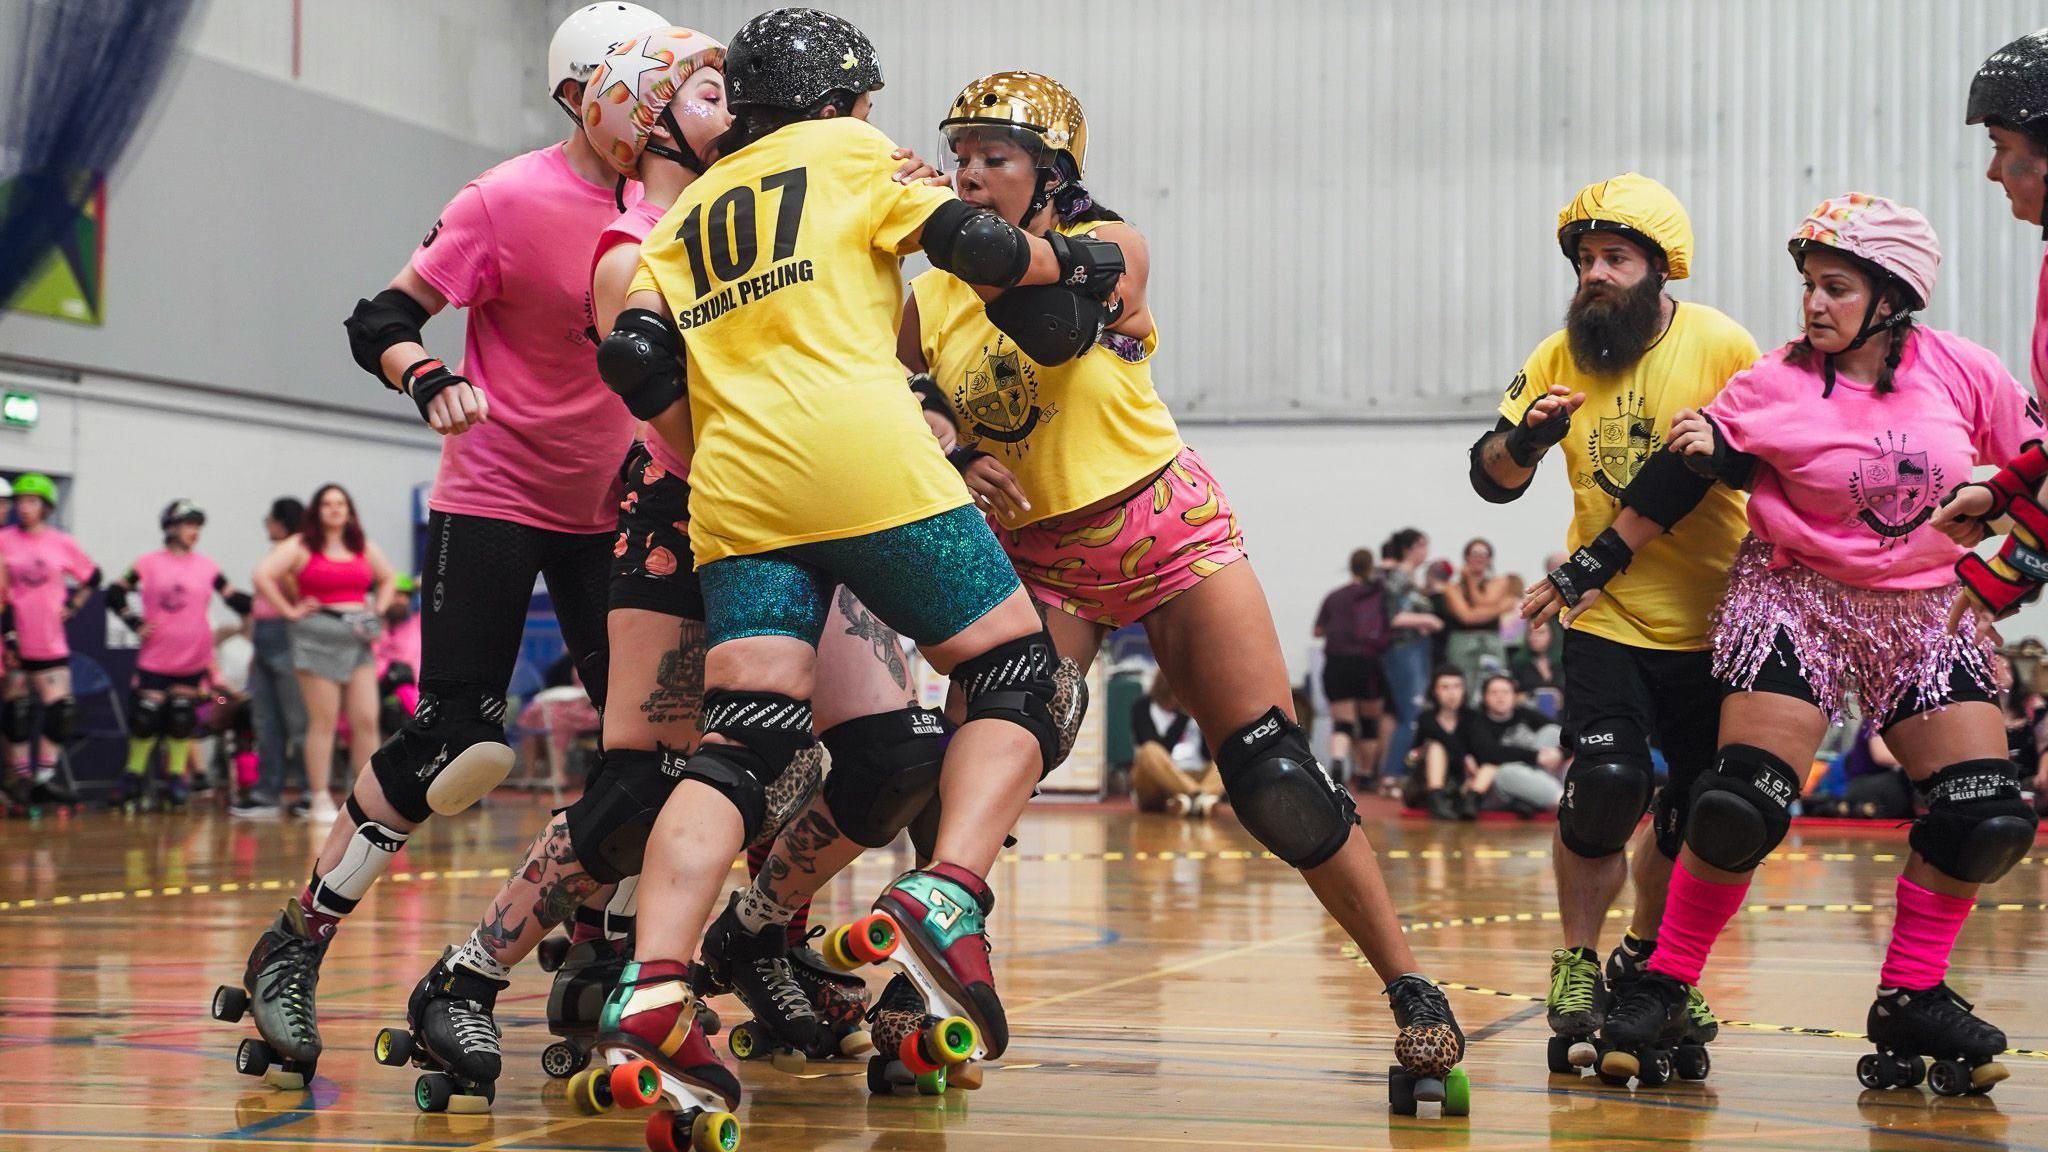 Roller derby charity event